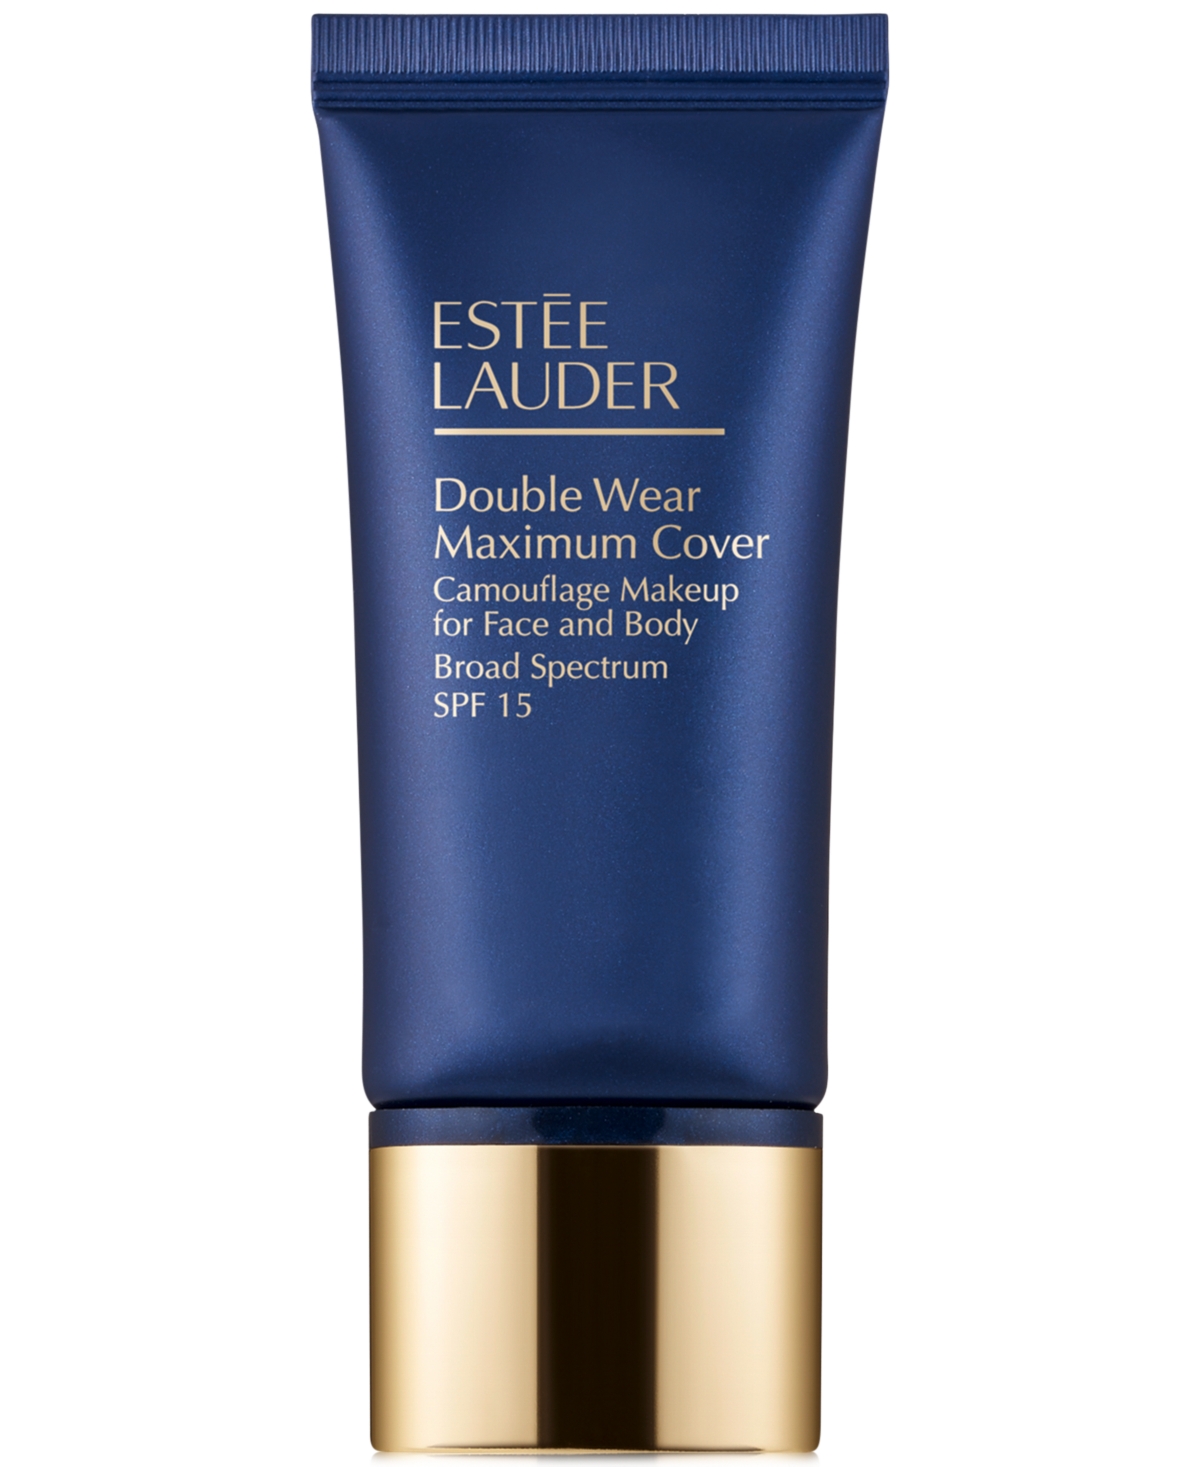 Estée Lauder Double Wear Maximum Cover Camouflage Foundation For Face And Body Spf 15, 1 Oz. In C Creamy Tan